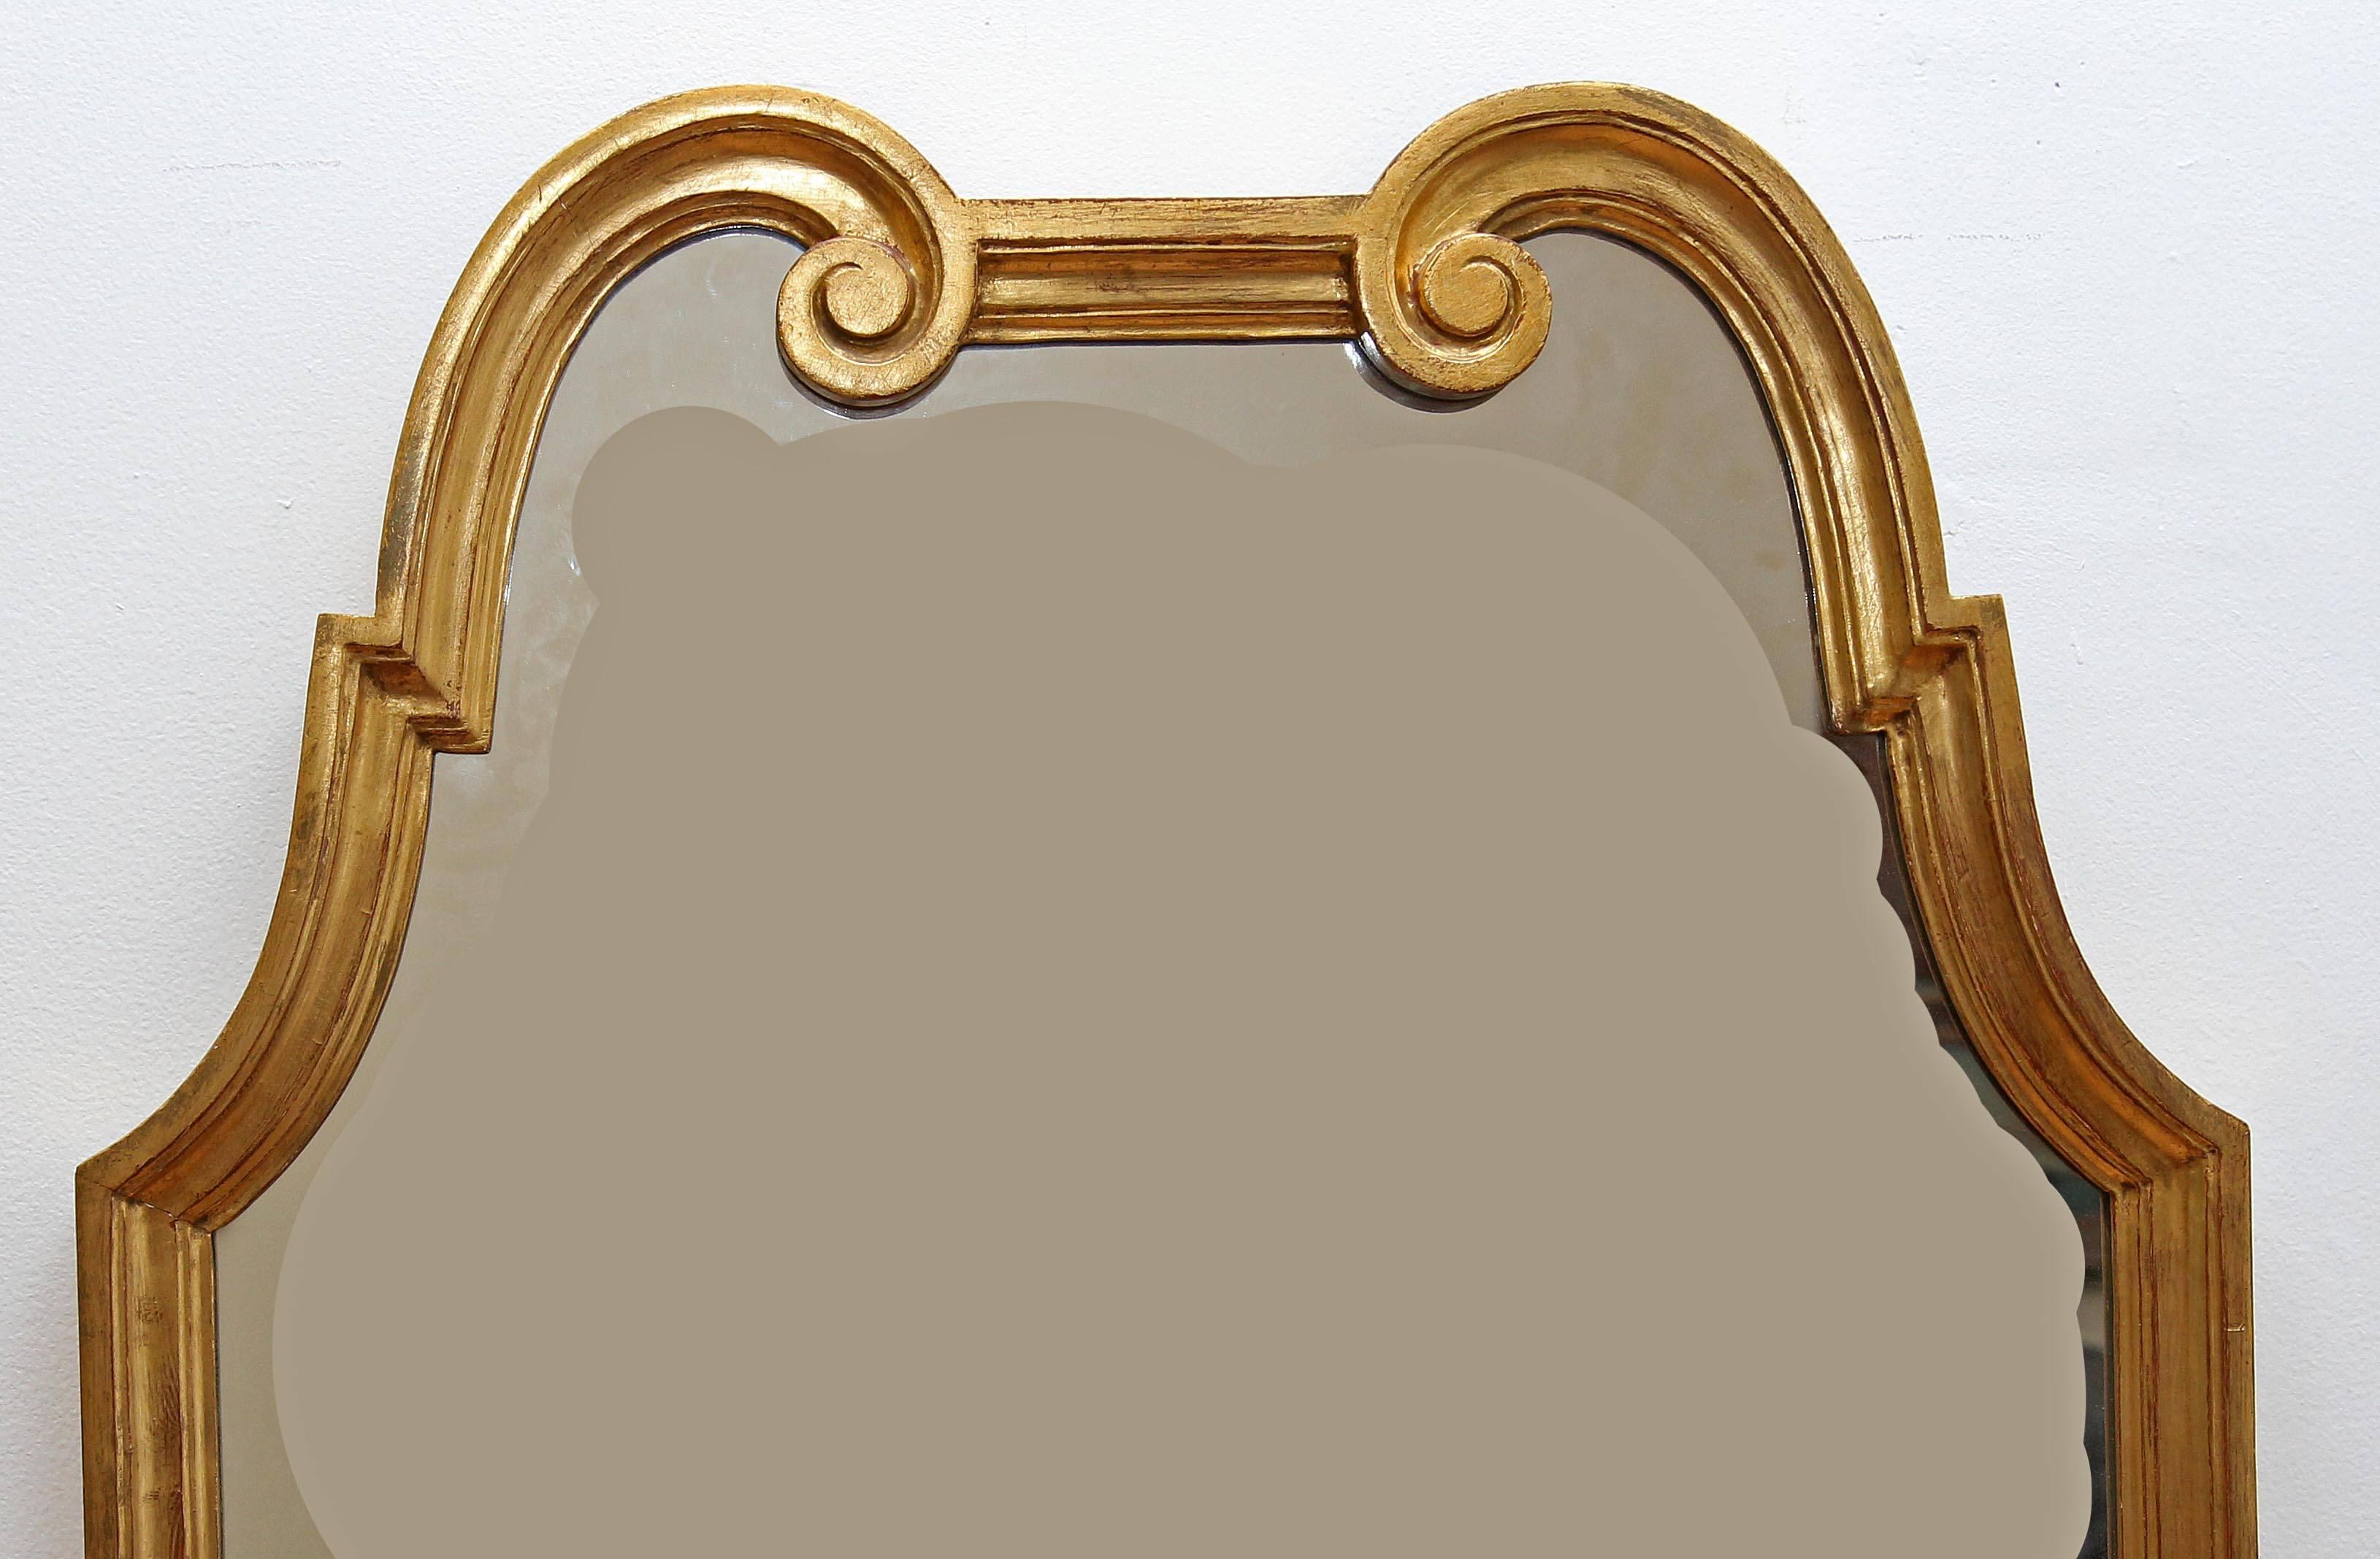 Vintage mid century modern giltwood console mirror. Excellent quality gilding. Measure: 53